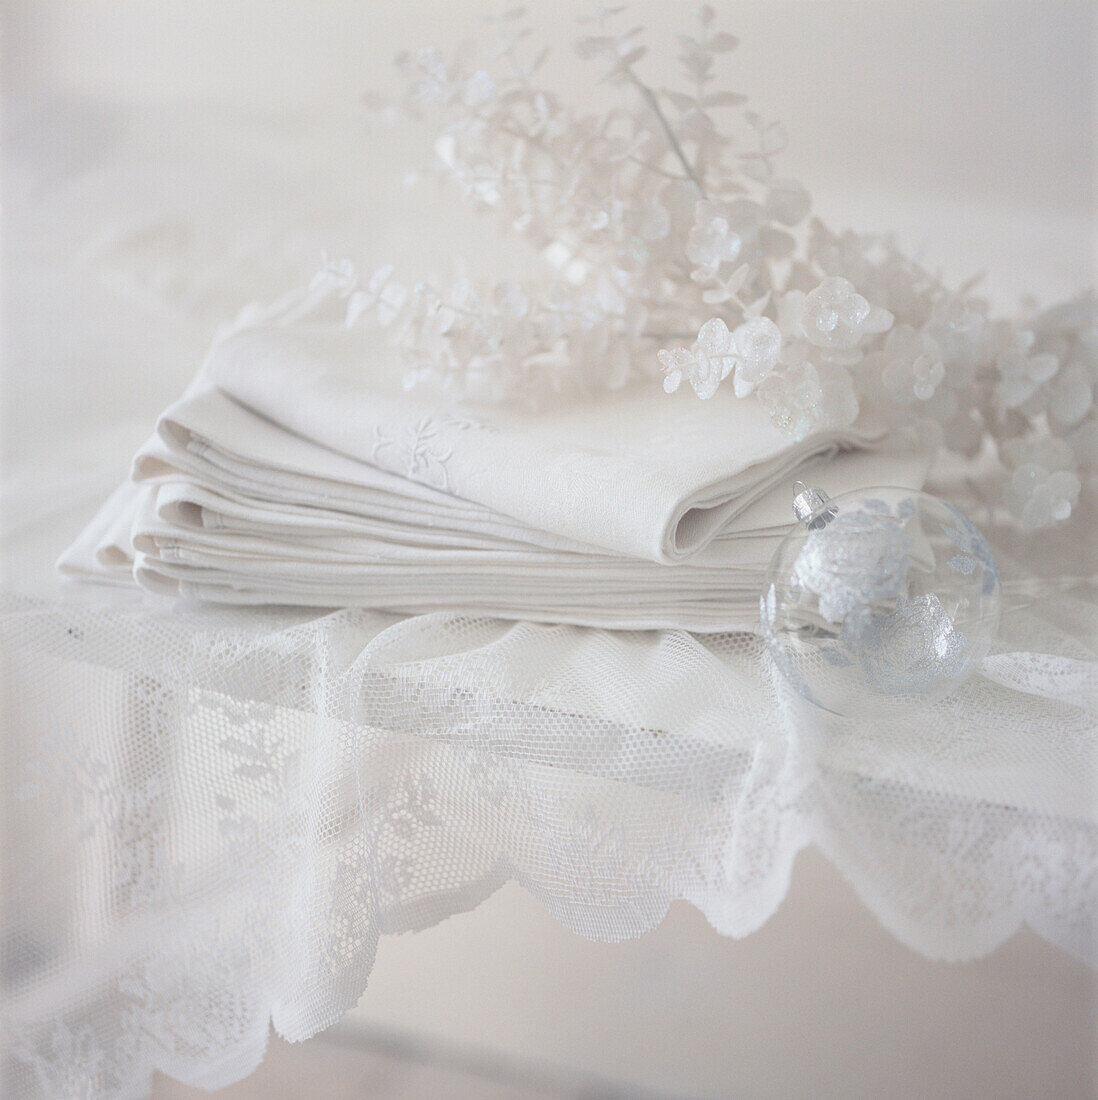 Tabletop detail with white delicate Christmas decorations